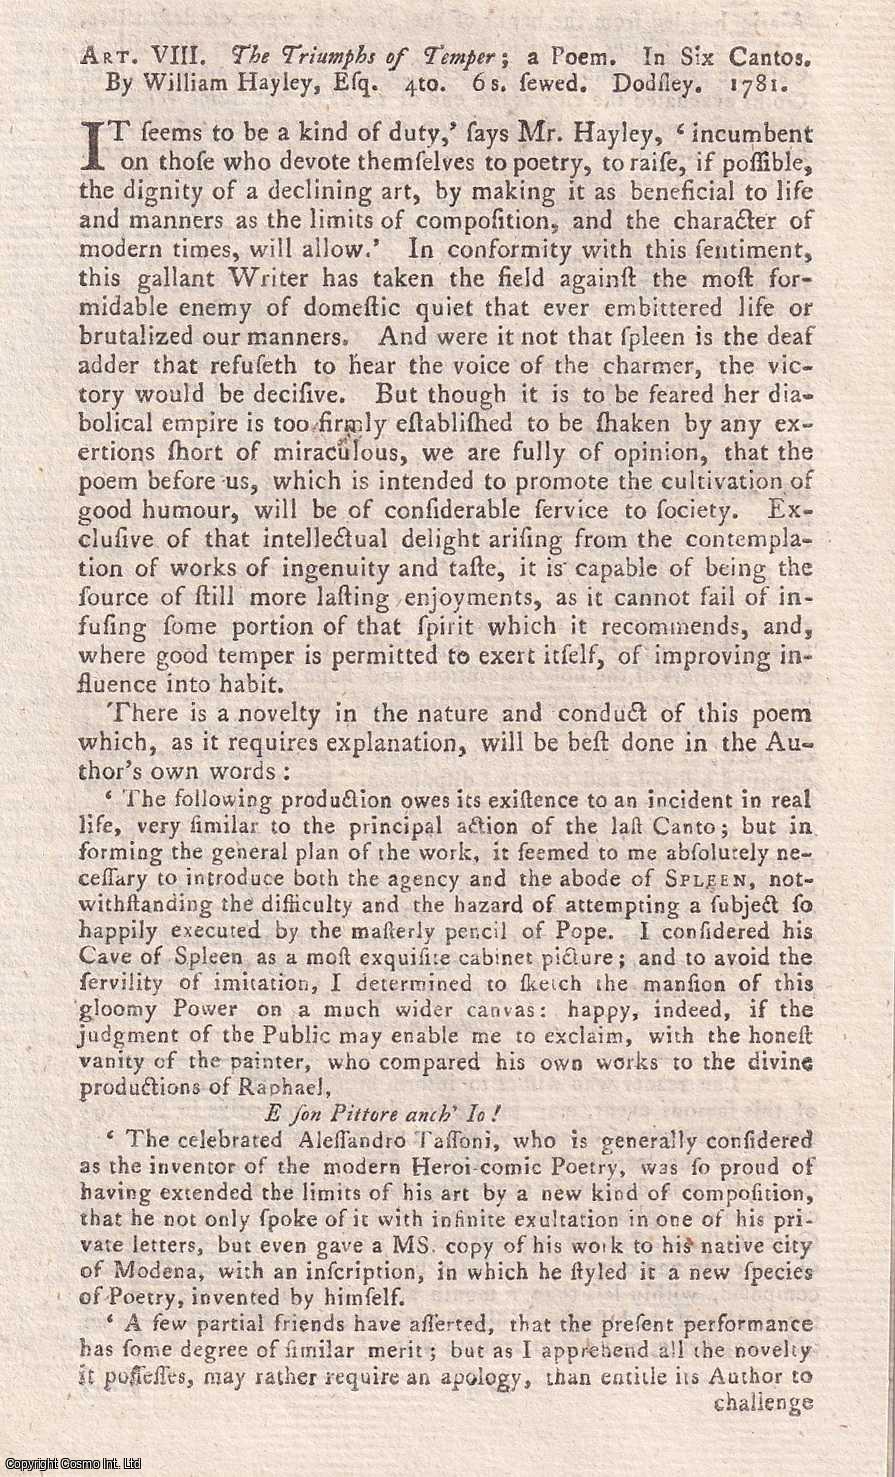 Author Not Stated - The Triumphs of Temper; a Poem, by William Hayley. An original essay from the Monthly Review, 1781. No author is given for this article.